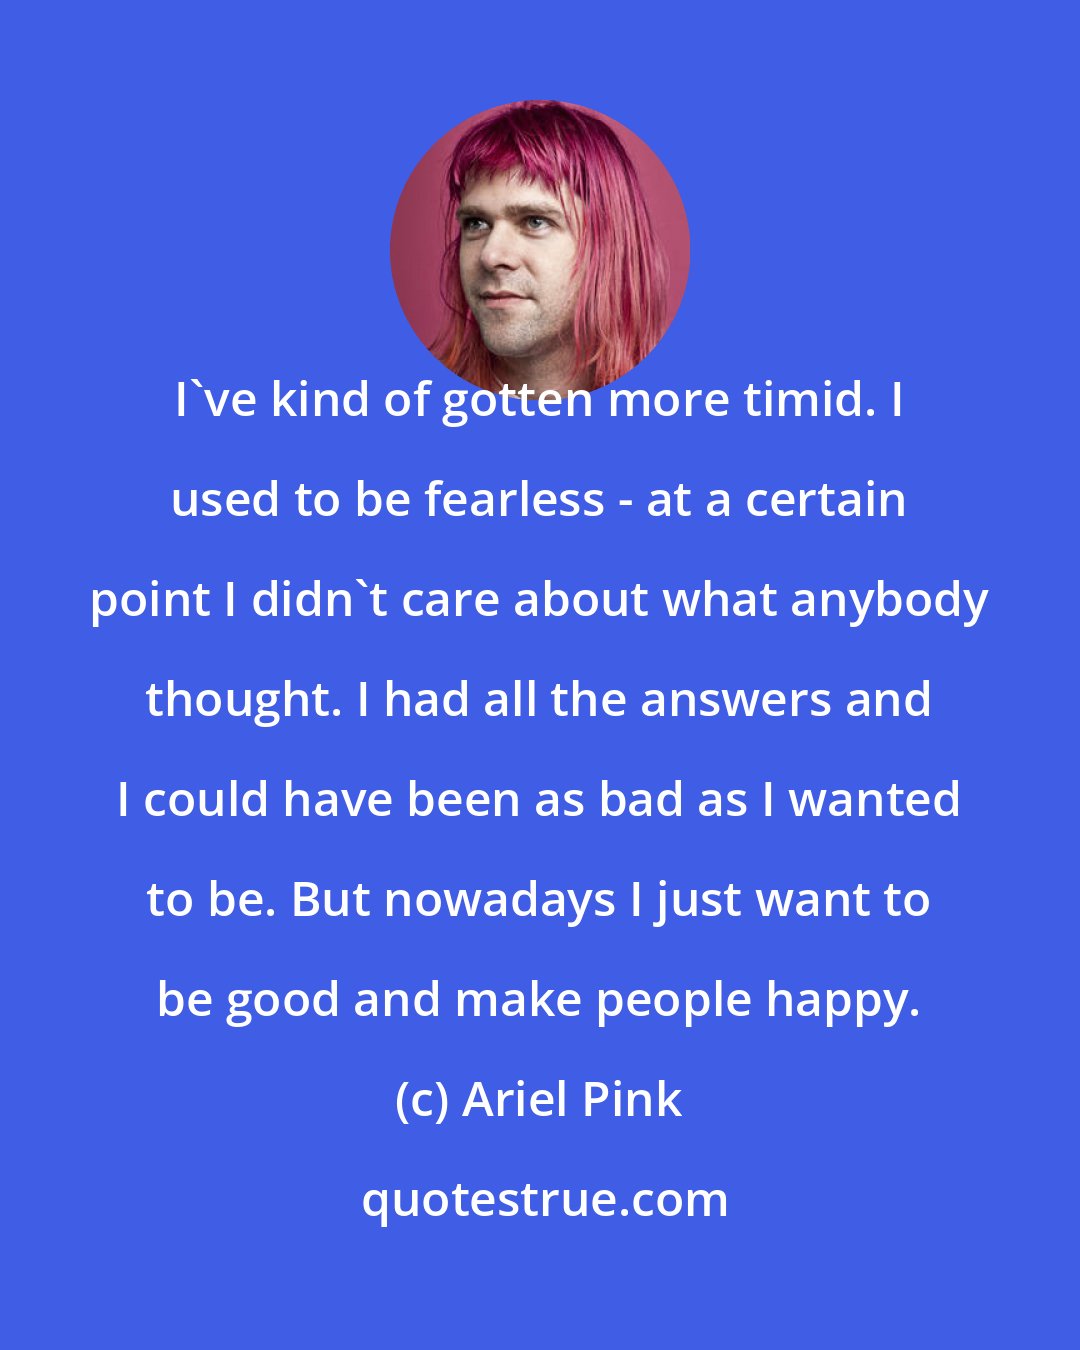 Ariel Pink: I've kind of gotten more timid. I used to be fearless - at a certain point I didn't care about what anybody thought. I had all the answers and I could have been as bad as I wanted to be. But nowadays I just want to be good and make people happy.